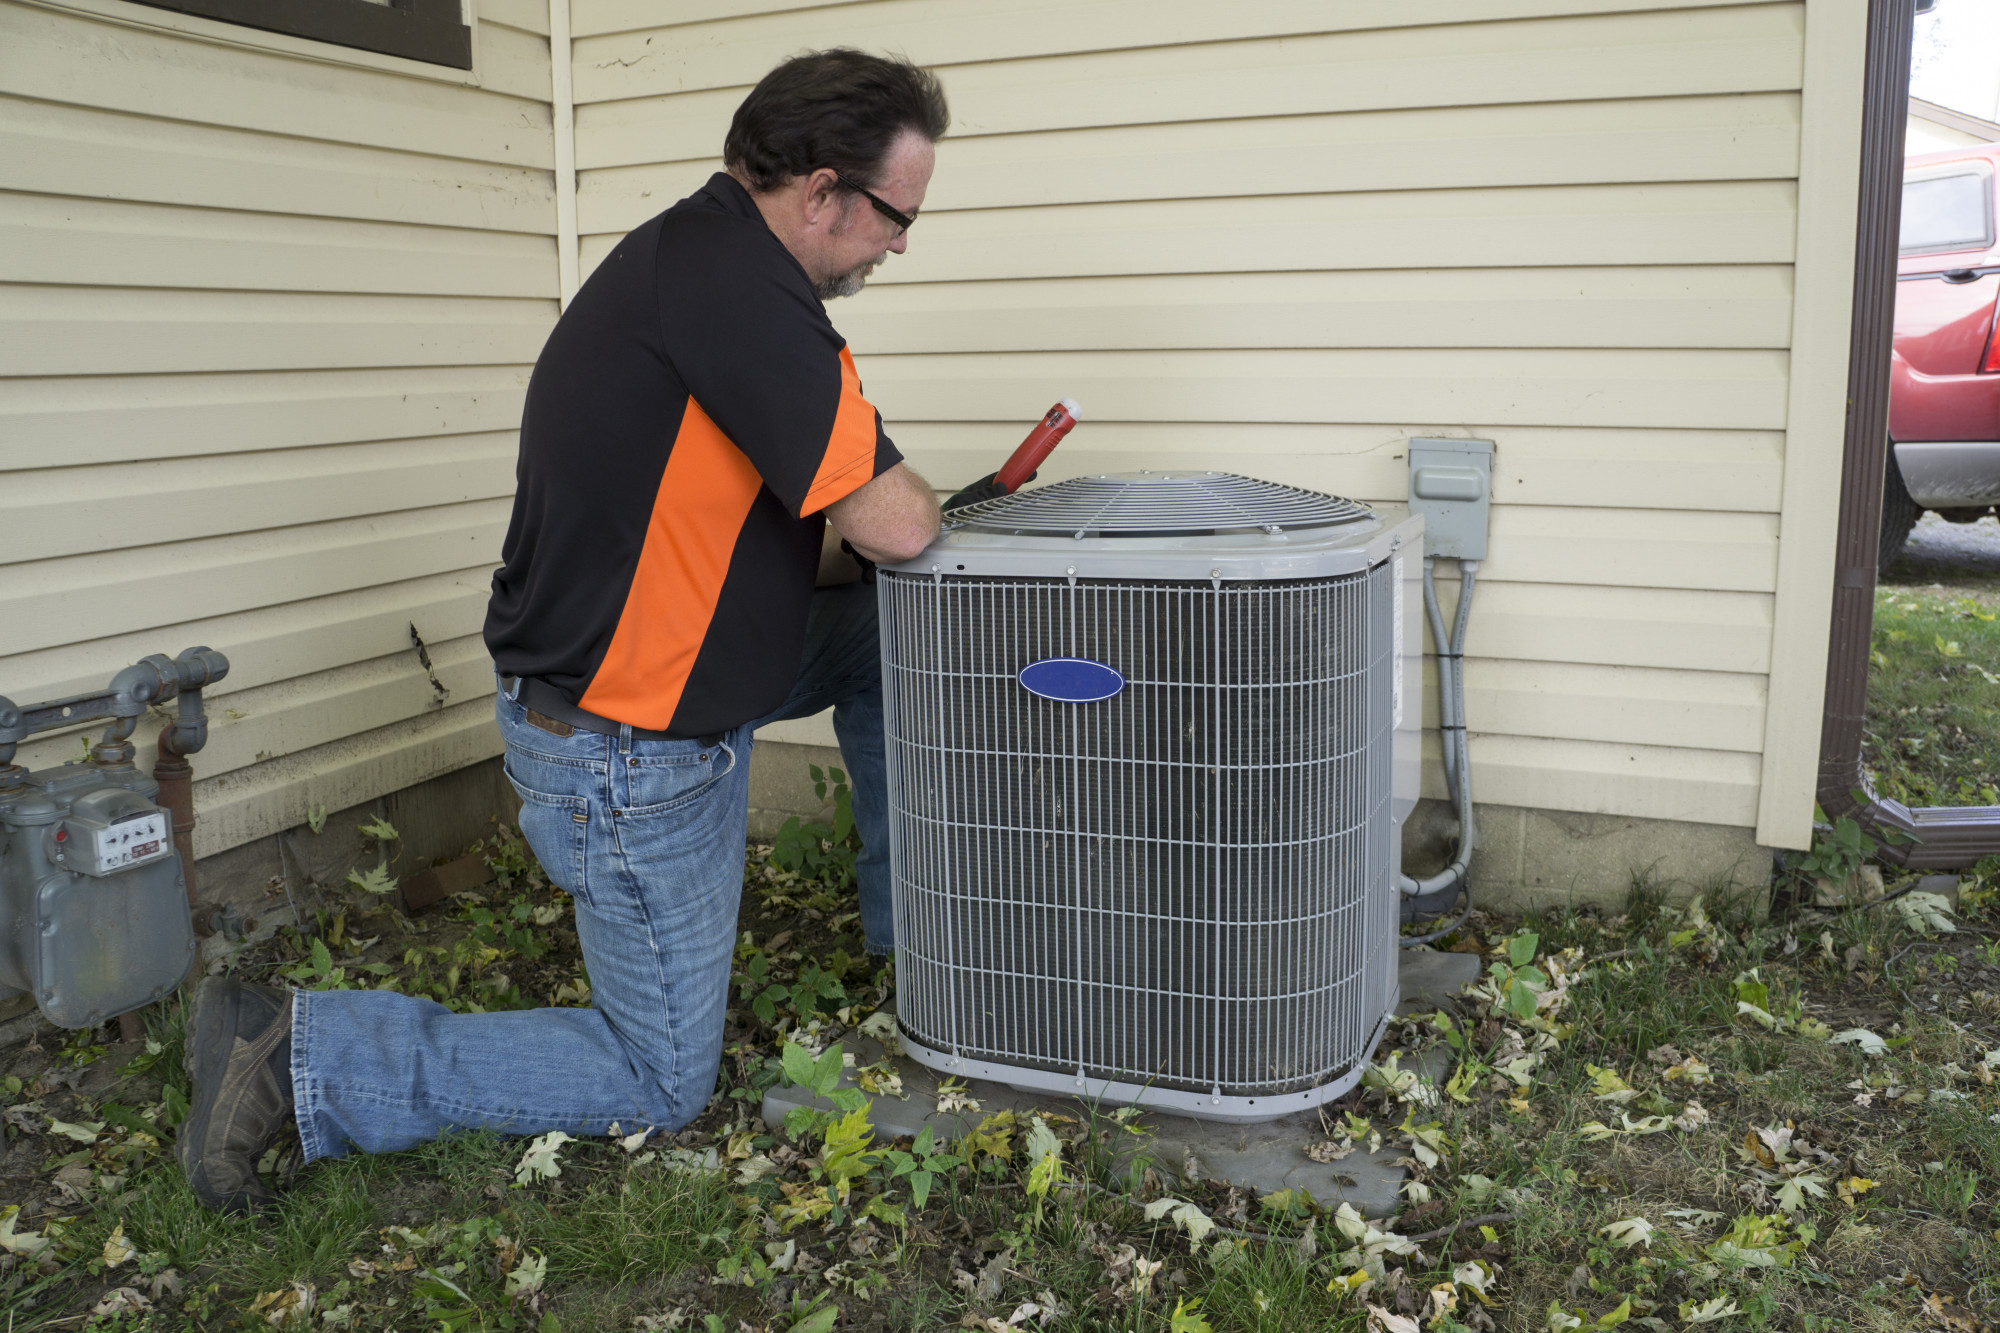 5 Major Signs That You Need Emergency HVAC Maintenance